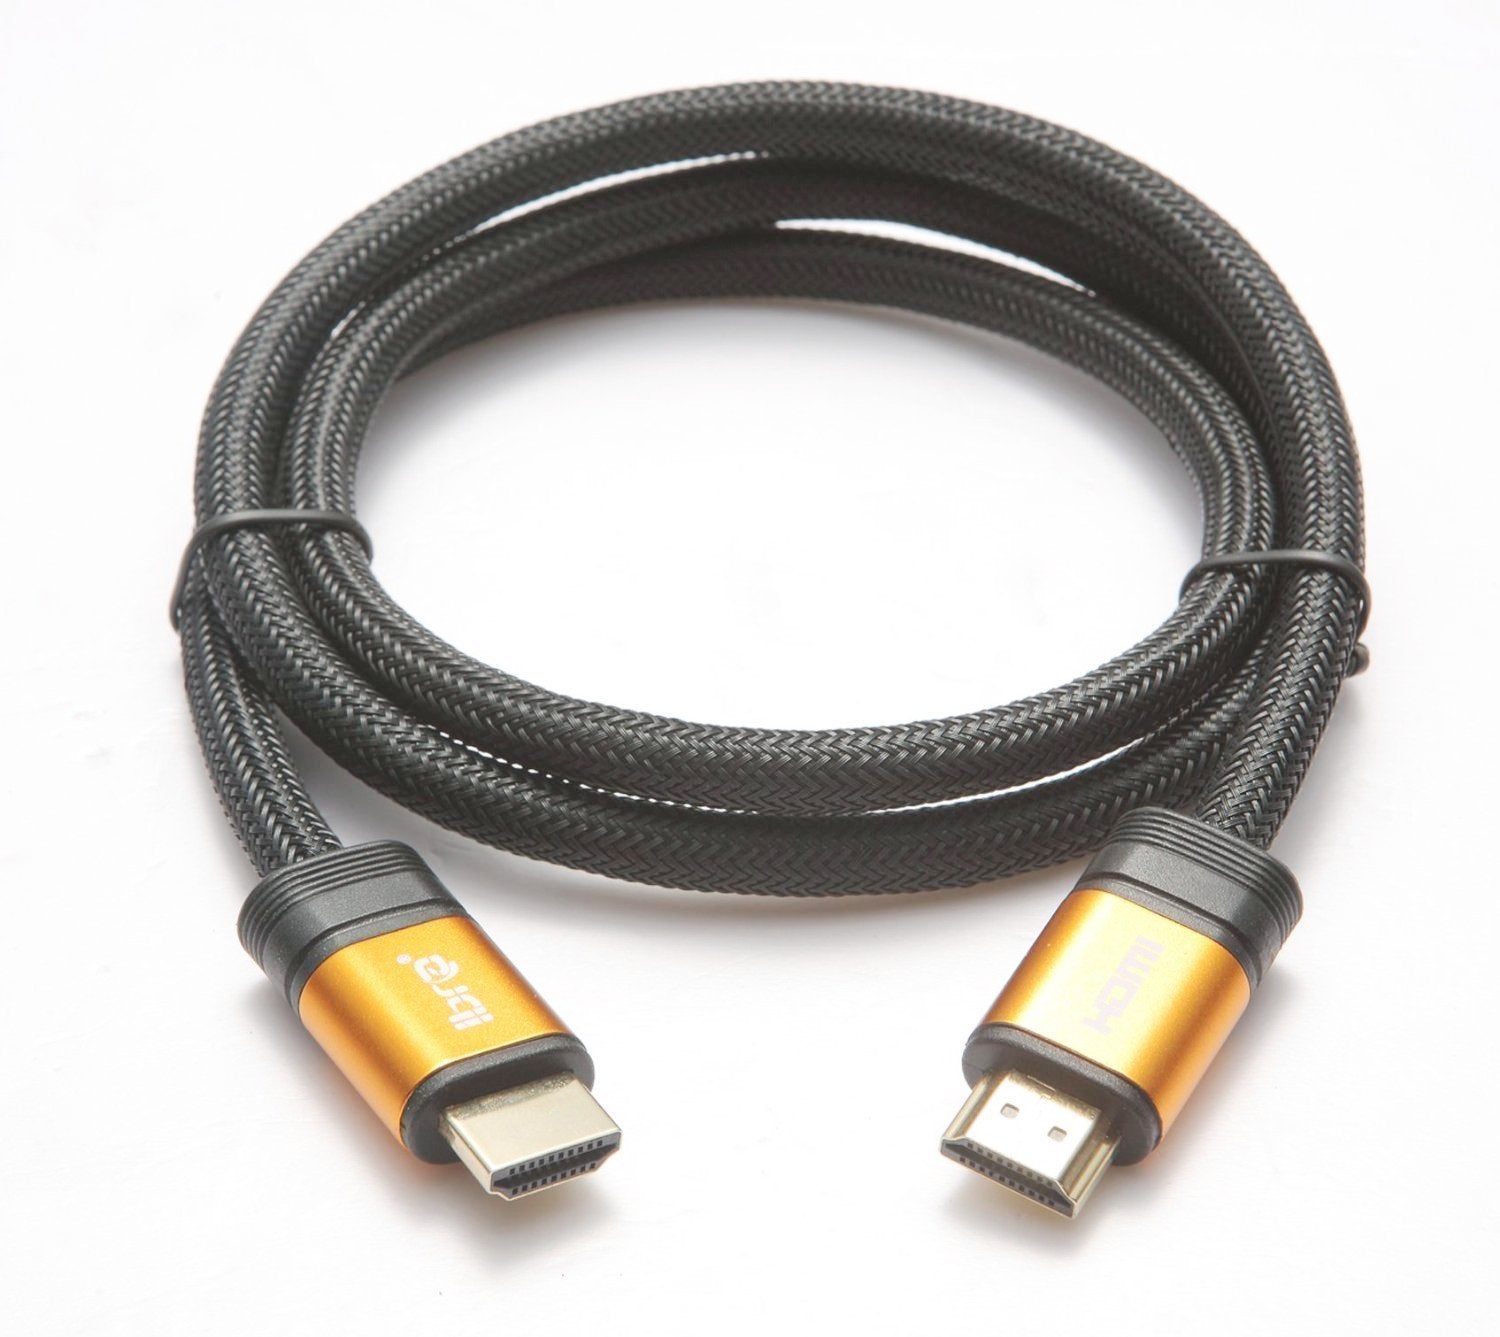 IBRA Orange HDMI Cable 7M - UHD HDMI 2.0 (4K@60Hz) Ready -18Gbps-28AWG Braided Cord -Gold Plated Connectors -Ethernet,Audio Return-Video 4K 2160p,HD 1080p,3D -Xbox PlayStation PS3 PS4 PC Apple TV